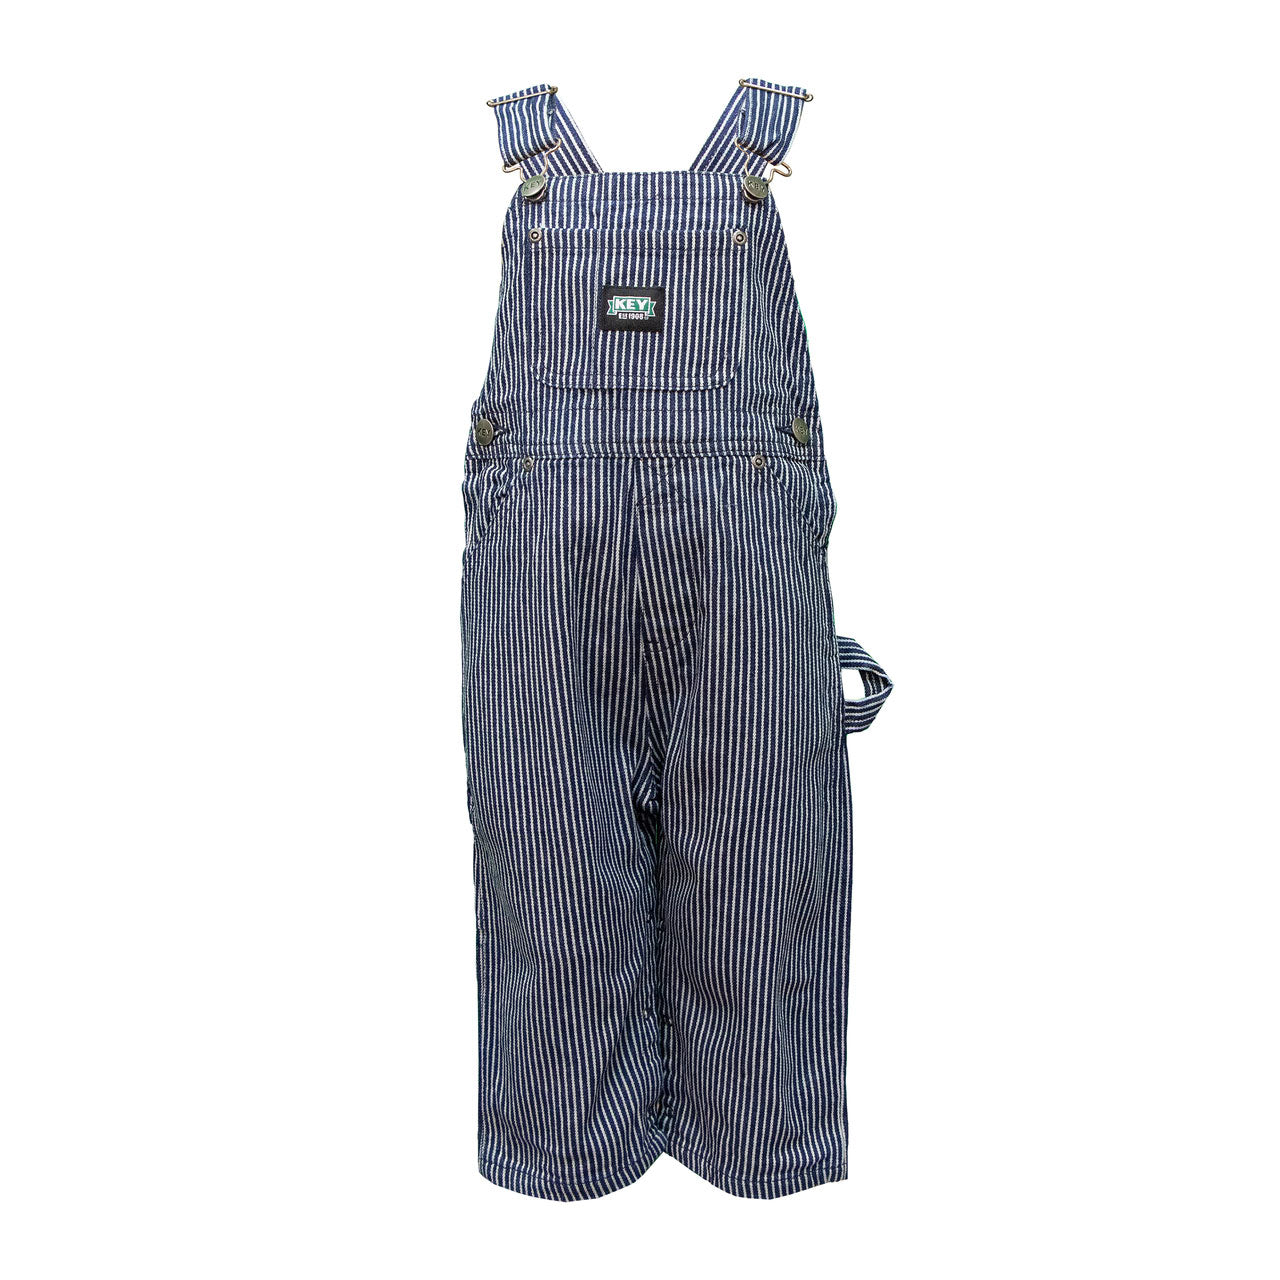 Full-length front view of striped toddley bib-overall from KEY.